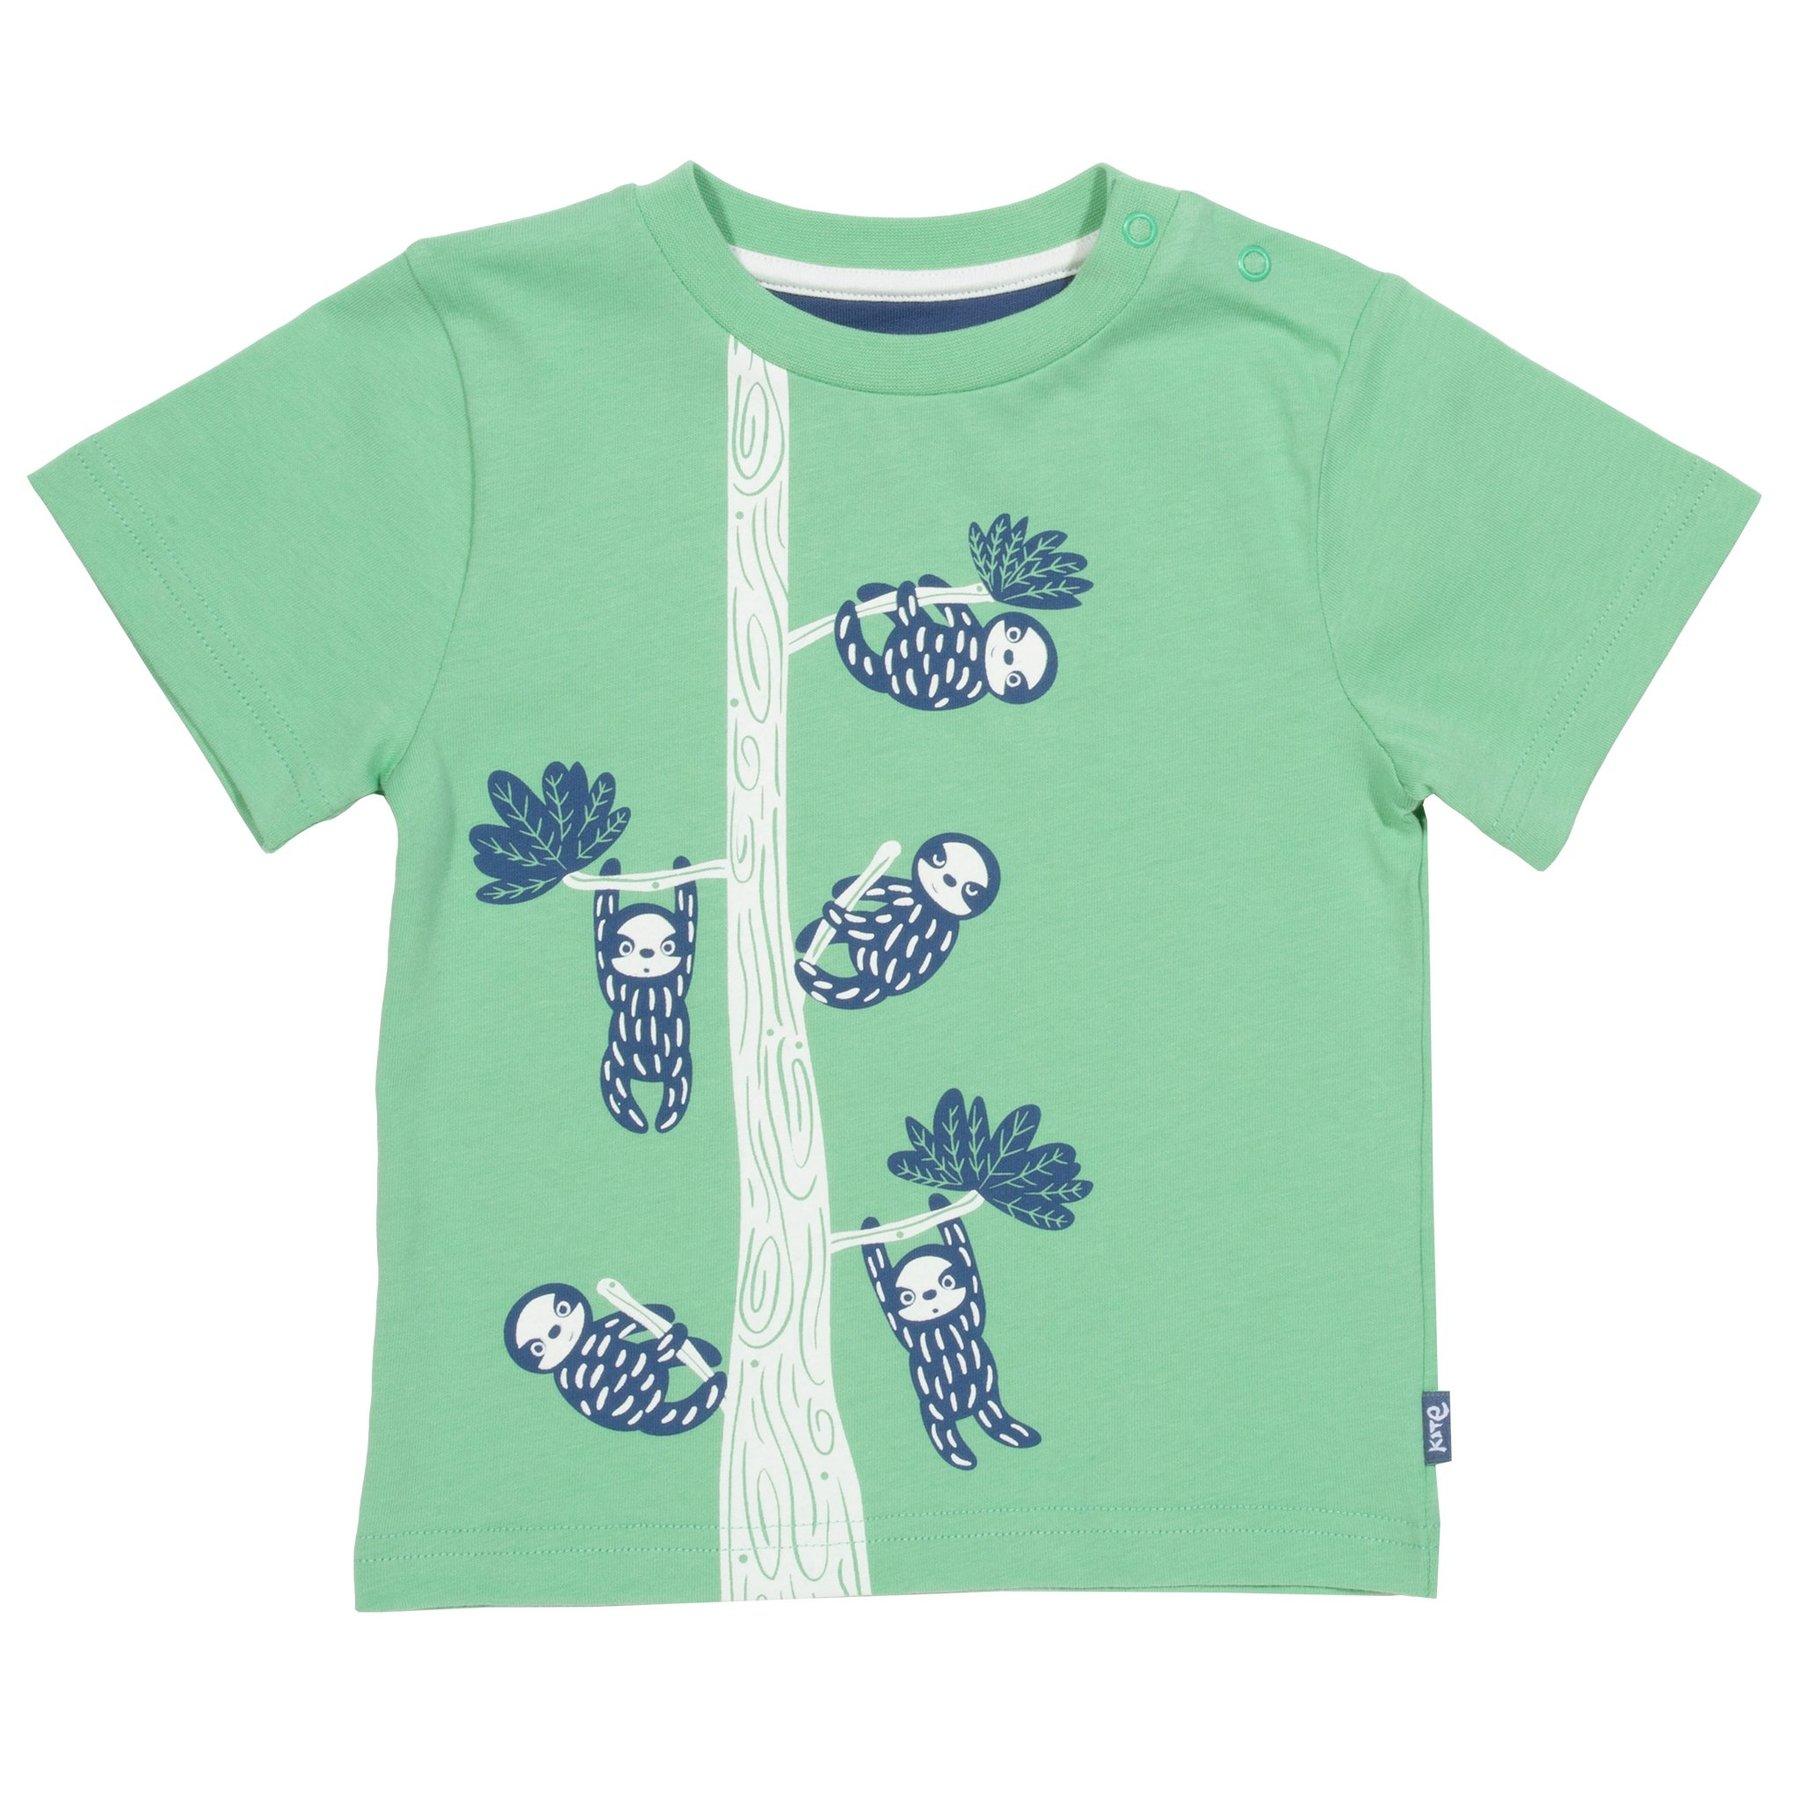 Kite Clothing Little Sloth T-Shirt front